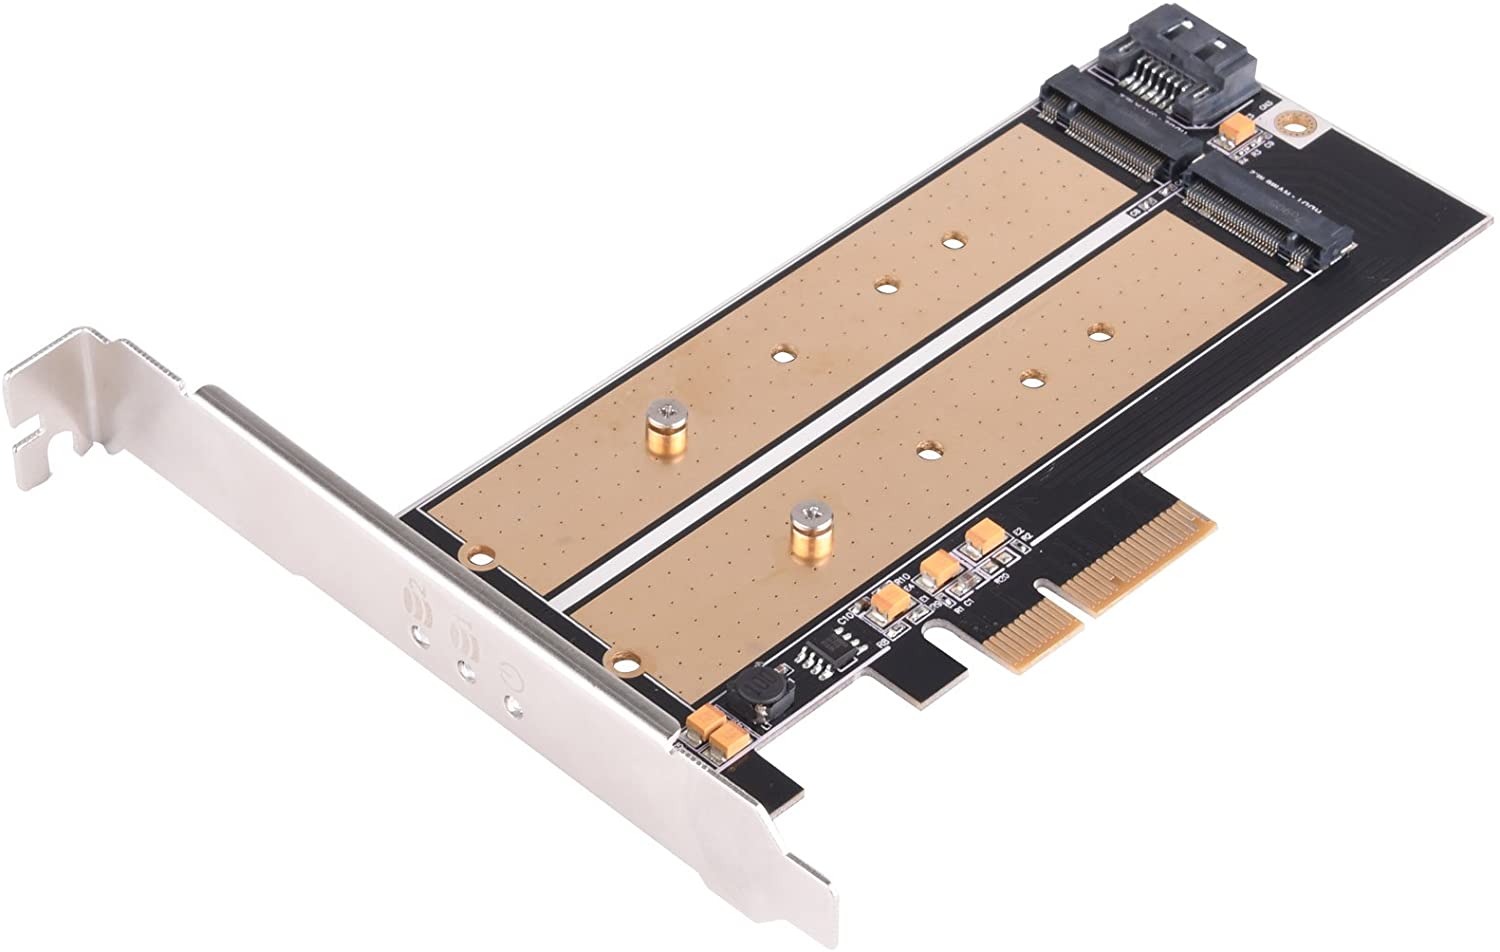 SilverStone Technology M.2 PCIE Adapter for SATA or PCIE NVMe SSD with Advanced Thermal Solution